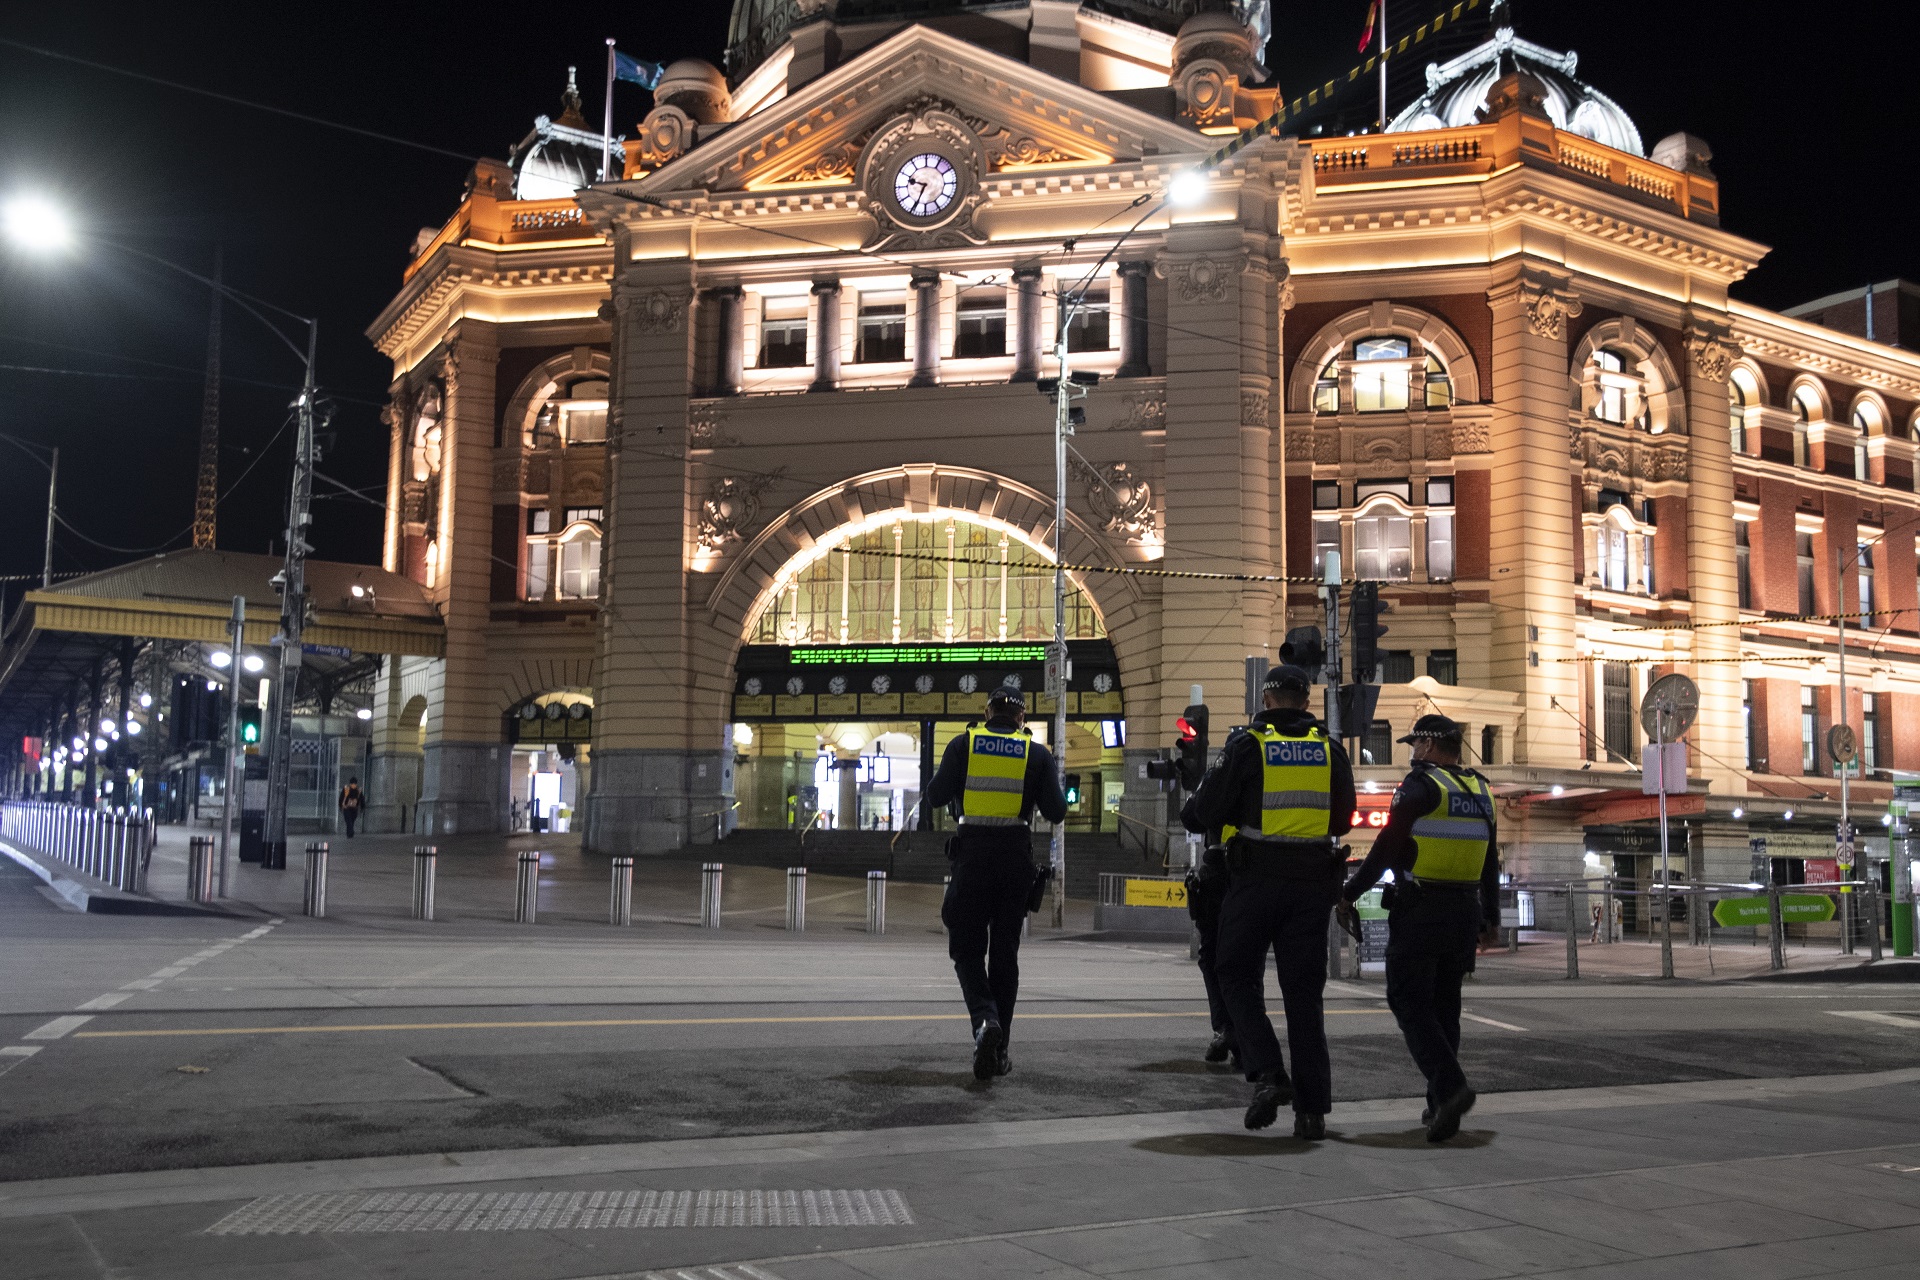 epa08591736 Police in front of Flinders Street Station during a 8PM-5AM curfew in Melbourne, Victoria, Australia, 08 August 2020. Victoria's second coronavirus disease (COVID-19) wave is stabilizing, according to authorities who expect case numbers to drop within the next two weeks.  EPA/ERIK ANDERSON  AUSTRALIA AND NEW ZEALAND OUT